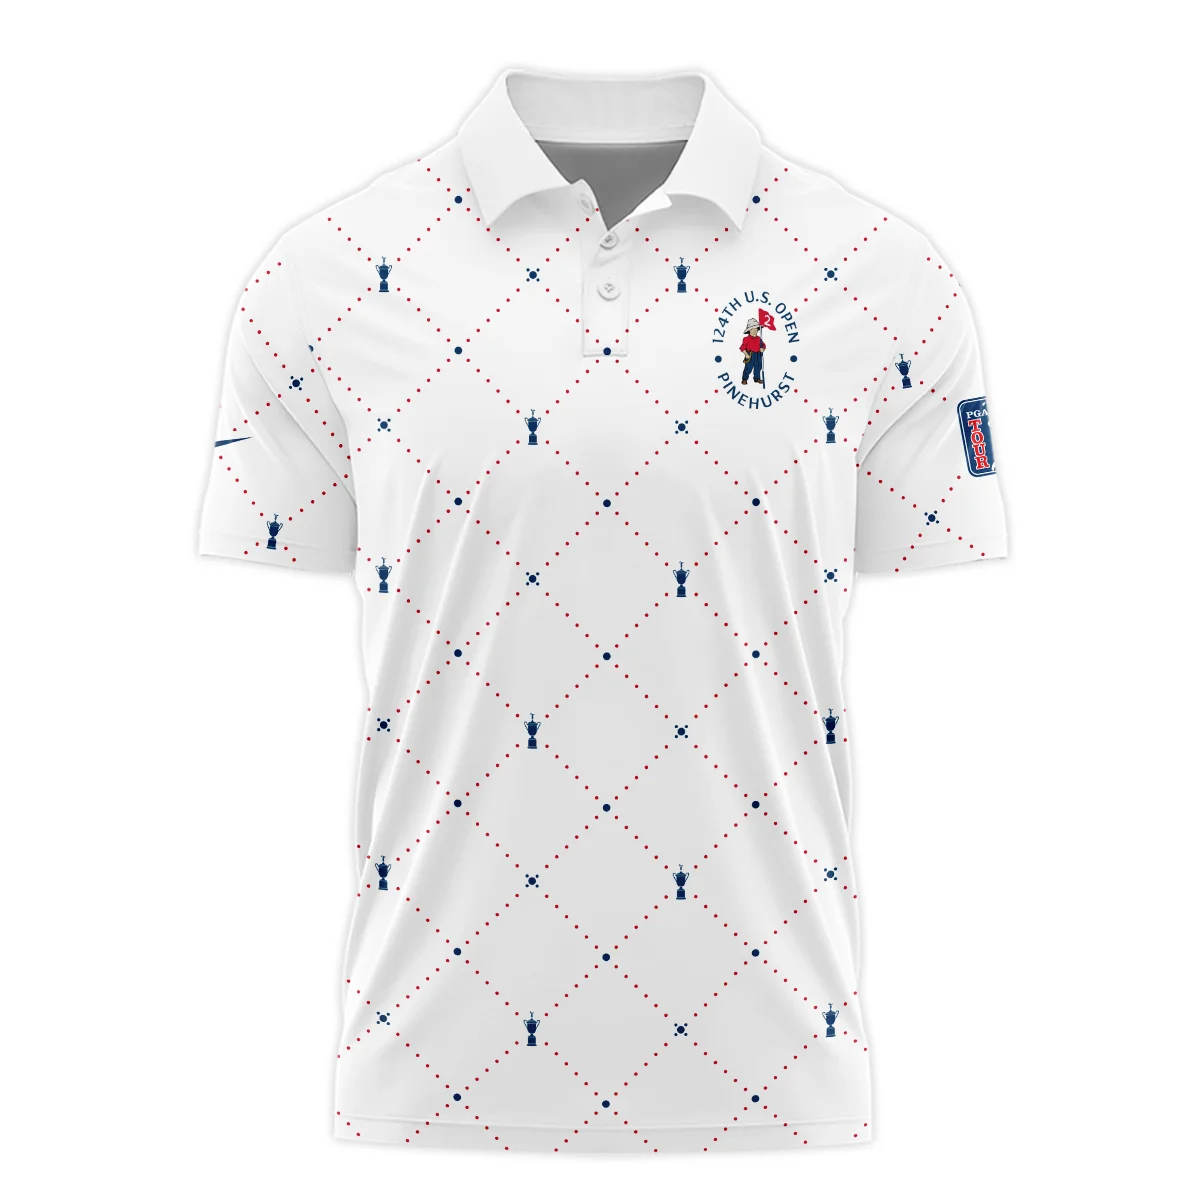 Argyle Pattern With Cup 124th U.S. Open Pinehurst Nike Vneck Polo Shirt Style Classic Polo Shirt For Men